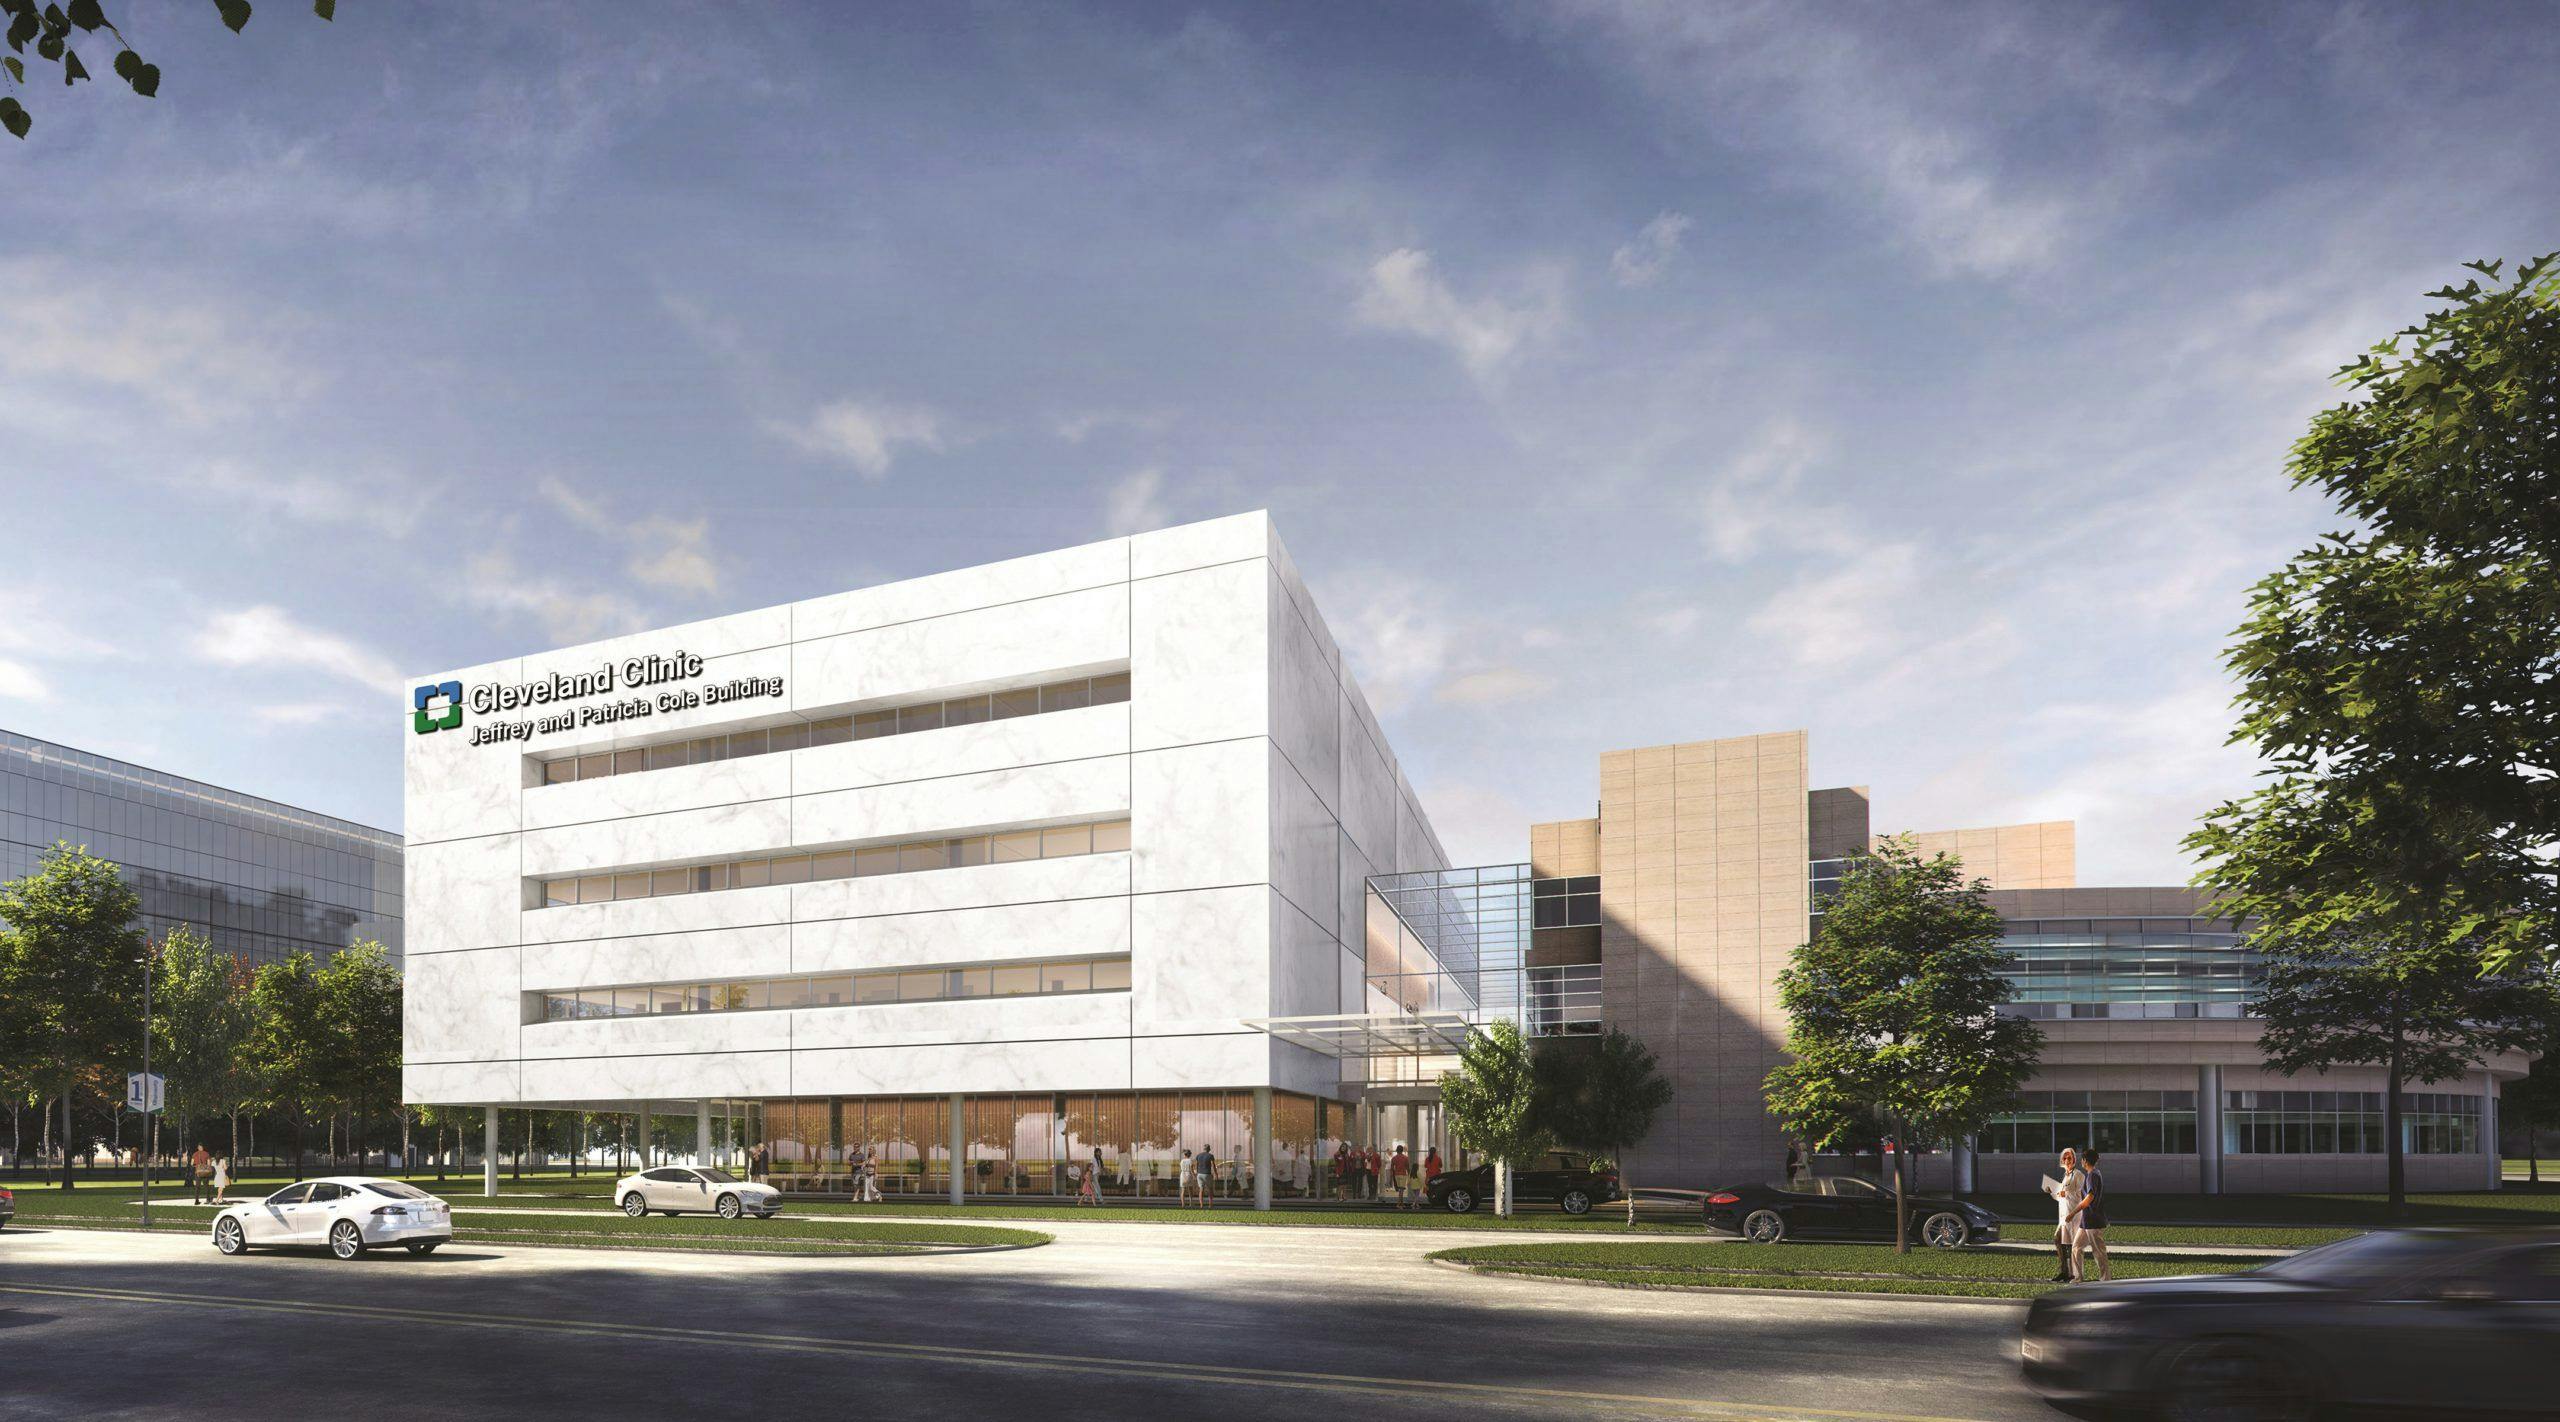 An artist’s rendering of the Jeffrey and Patricia Cole Building at Cole Eye Institute. (Image courtesy of Cleveland Clinic)